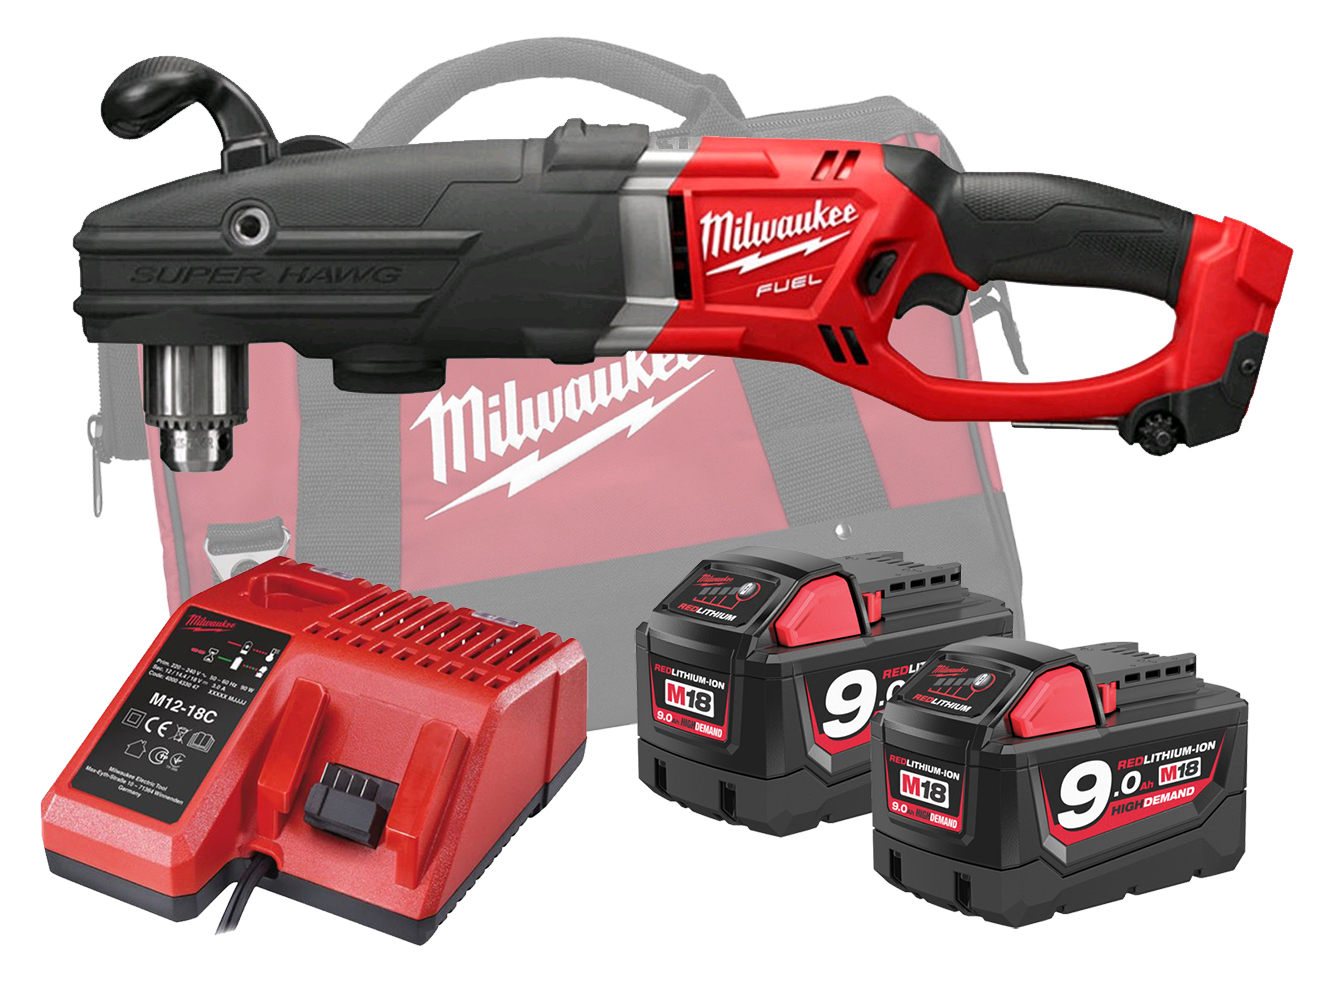 Milwaukee M18FRAD2 18V Fuel Super Hawg Right Angle Drill - 9.0Ah Pack